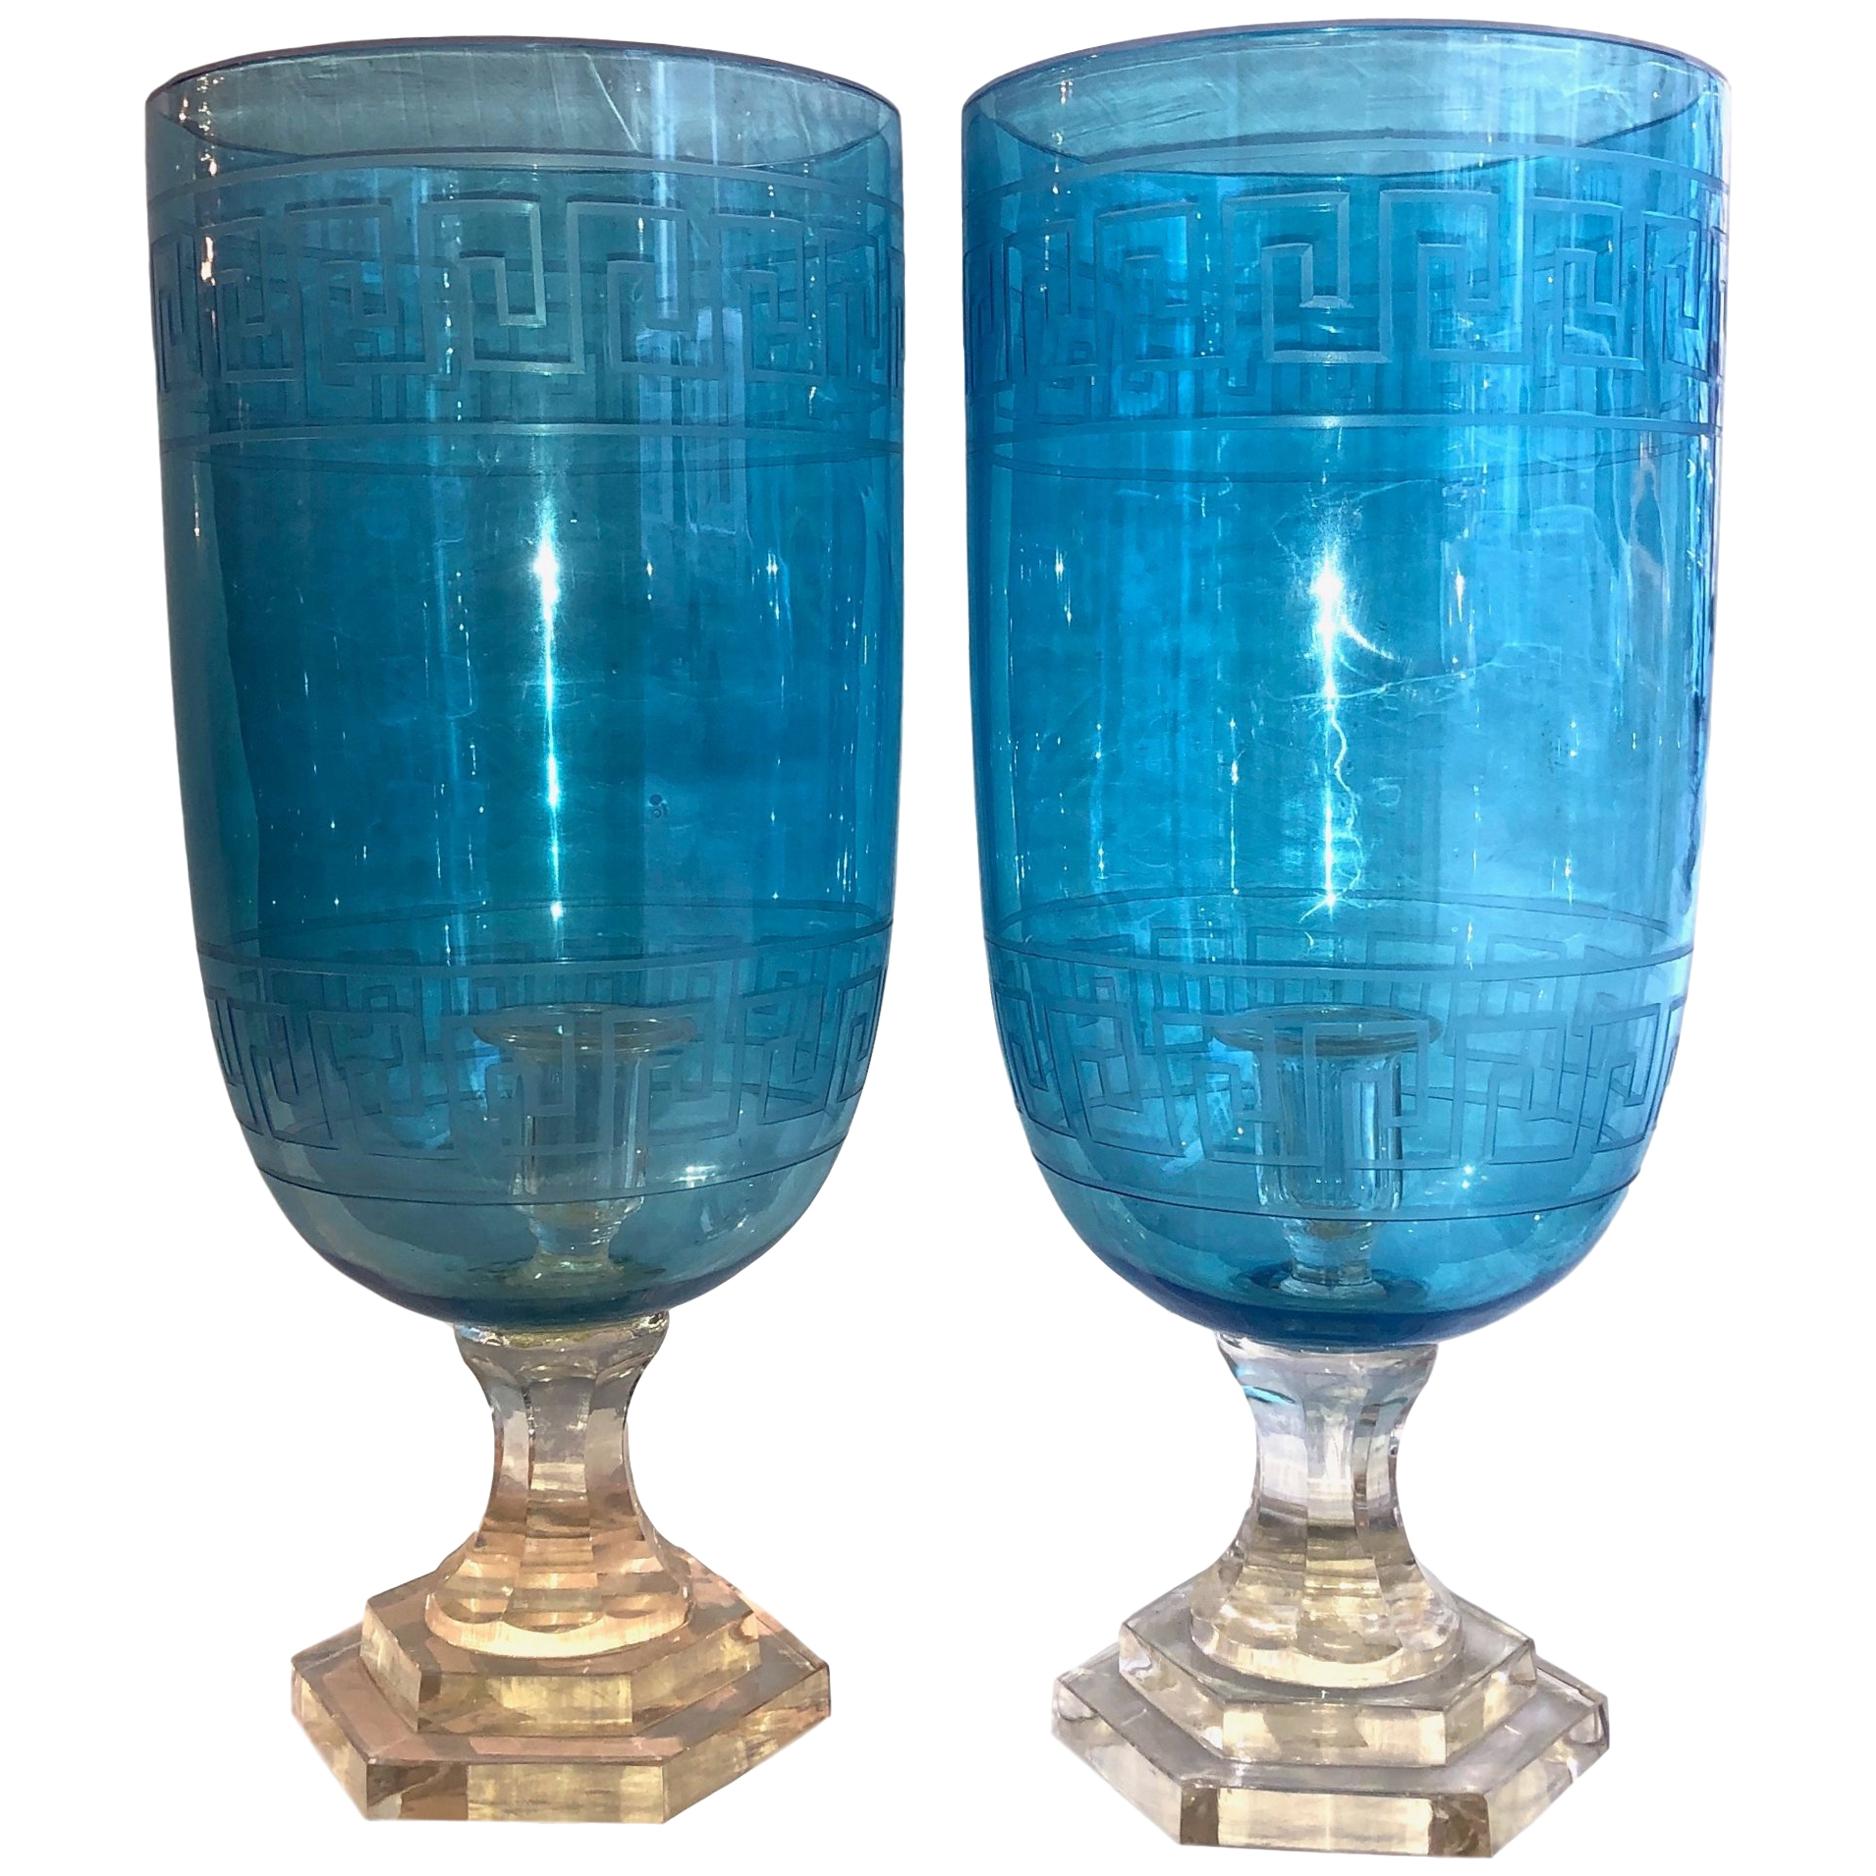 Pair of Etched Glass Hurricanes